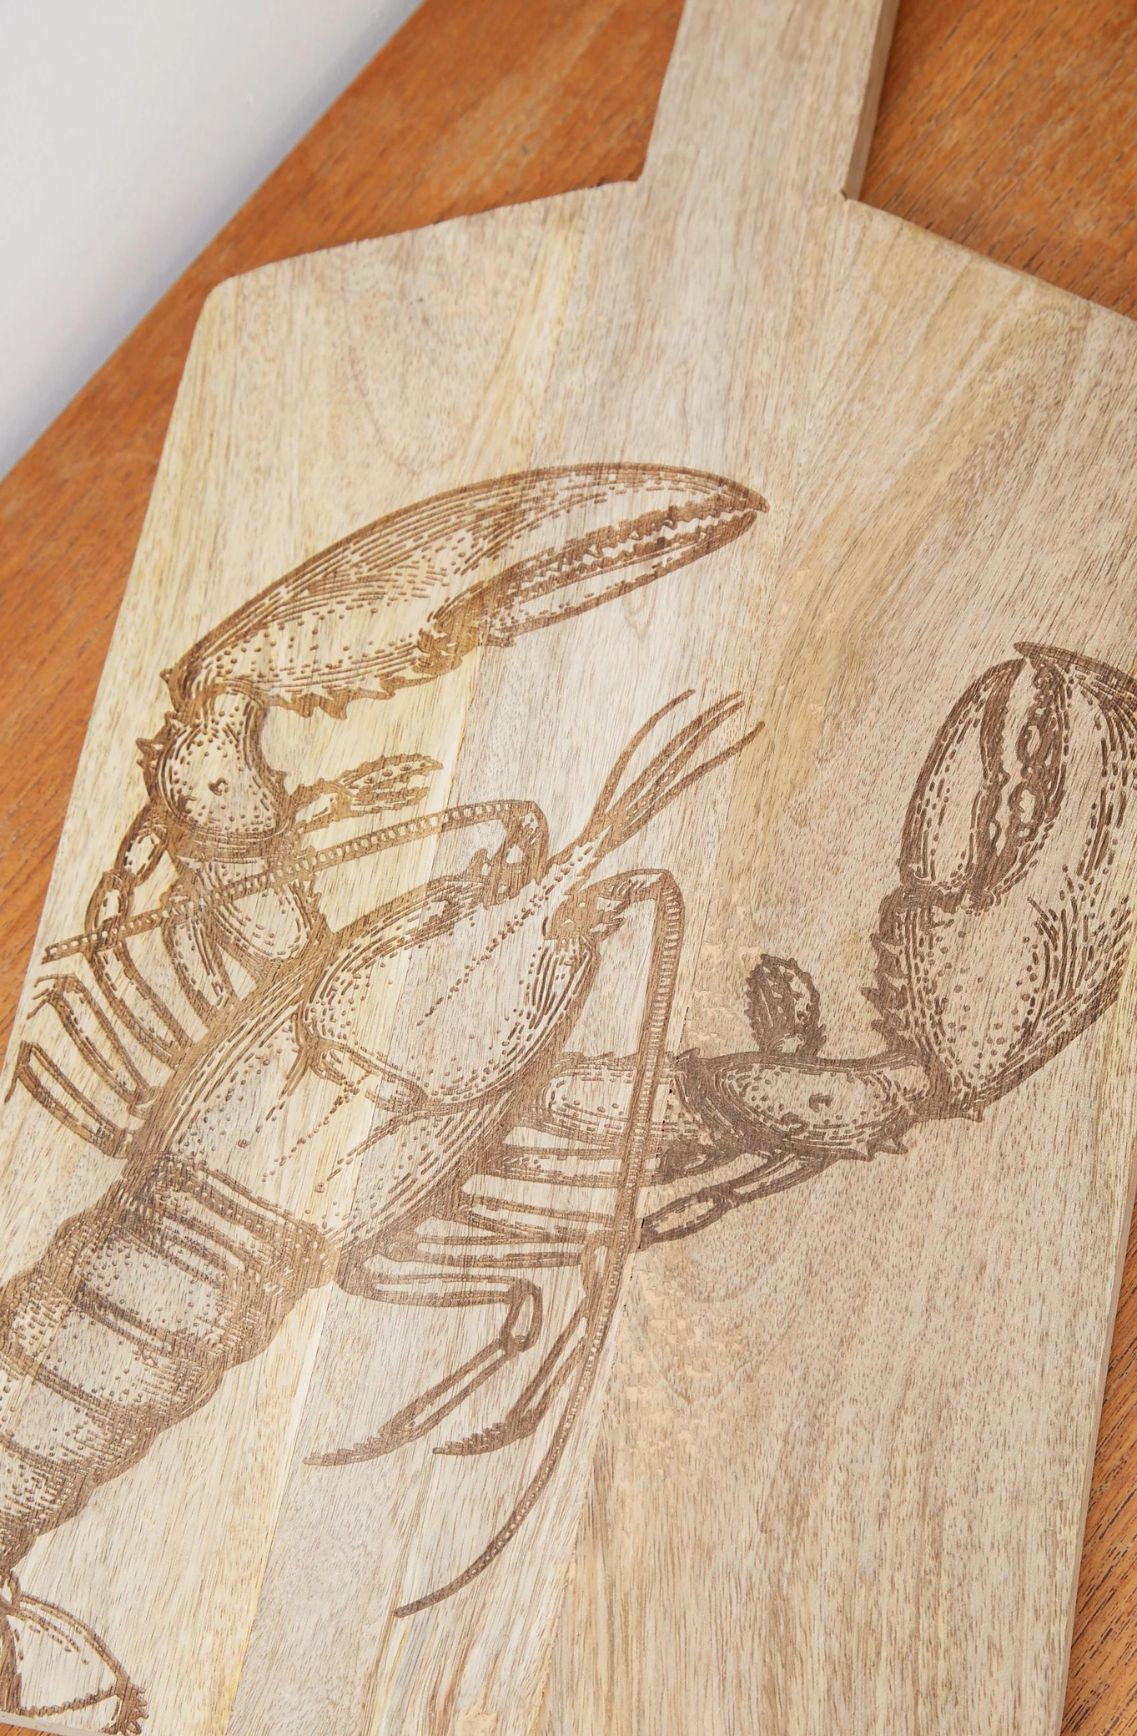 Lobster Etched Wood Chopping Board